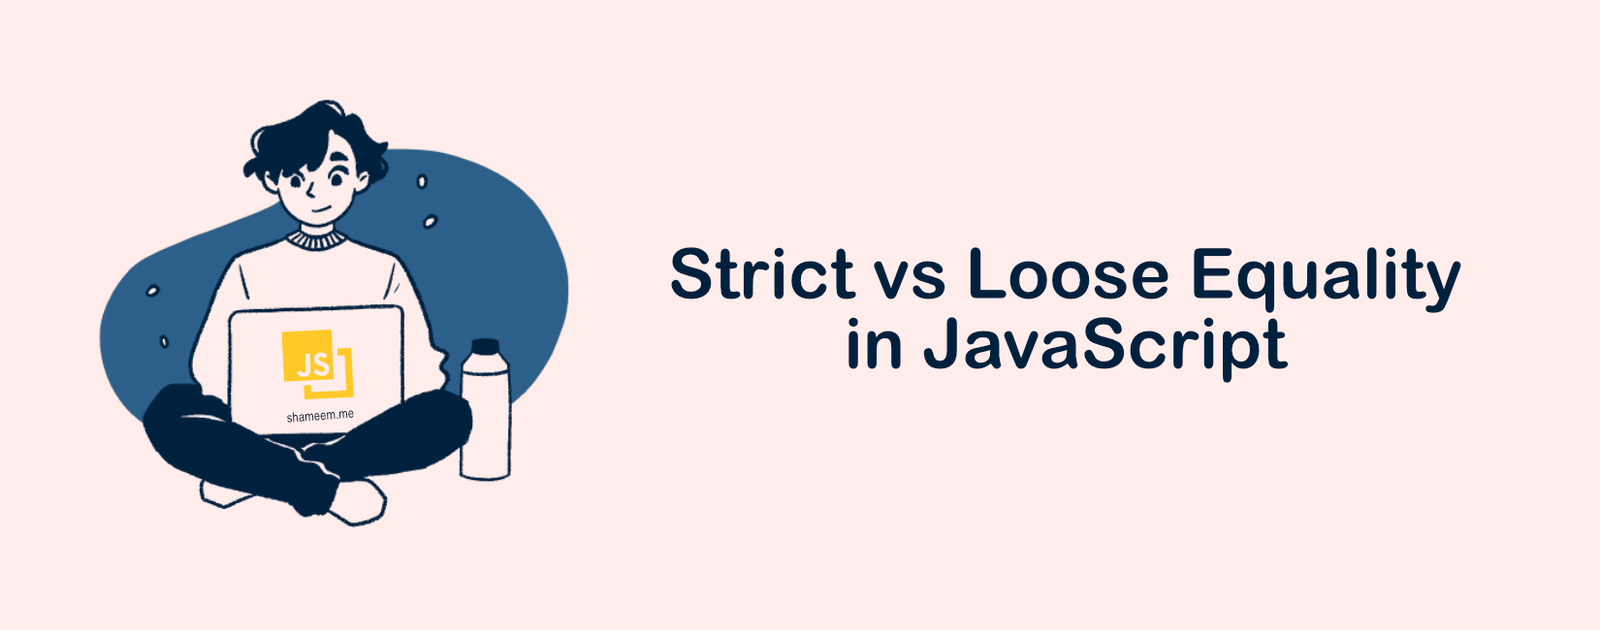 Strict vs Loose Equality in JavaScript